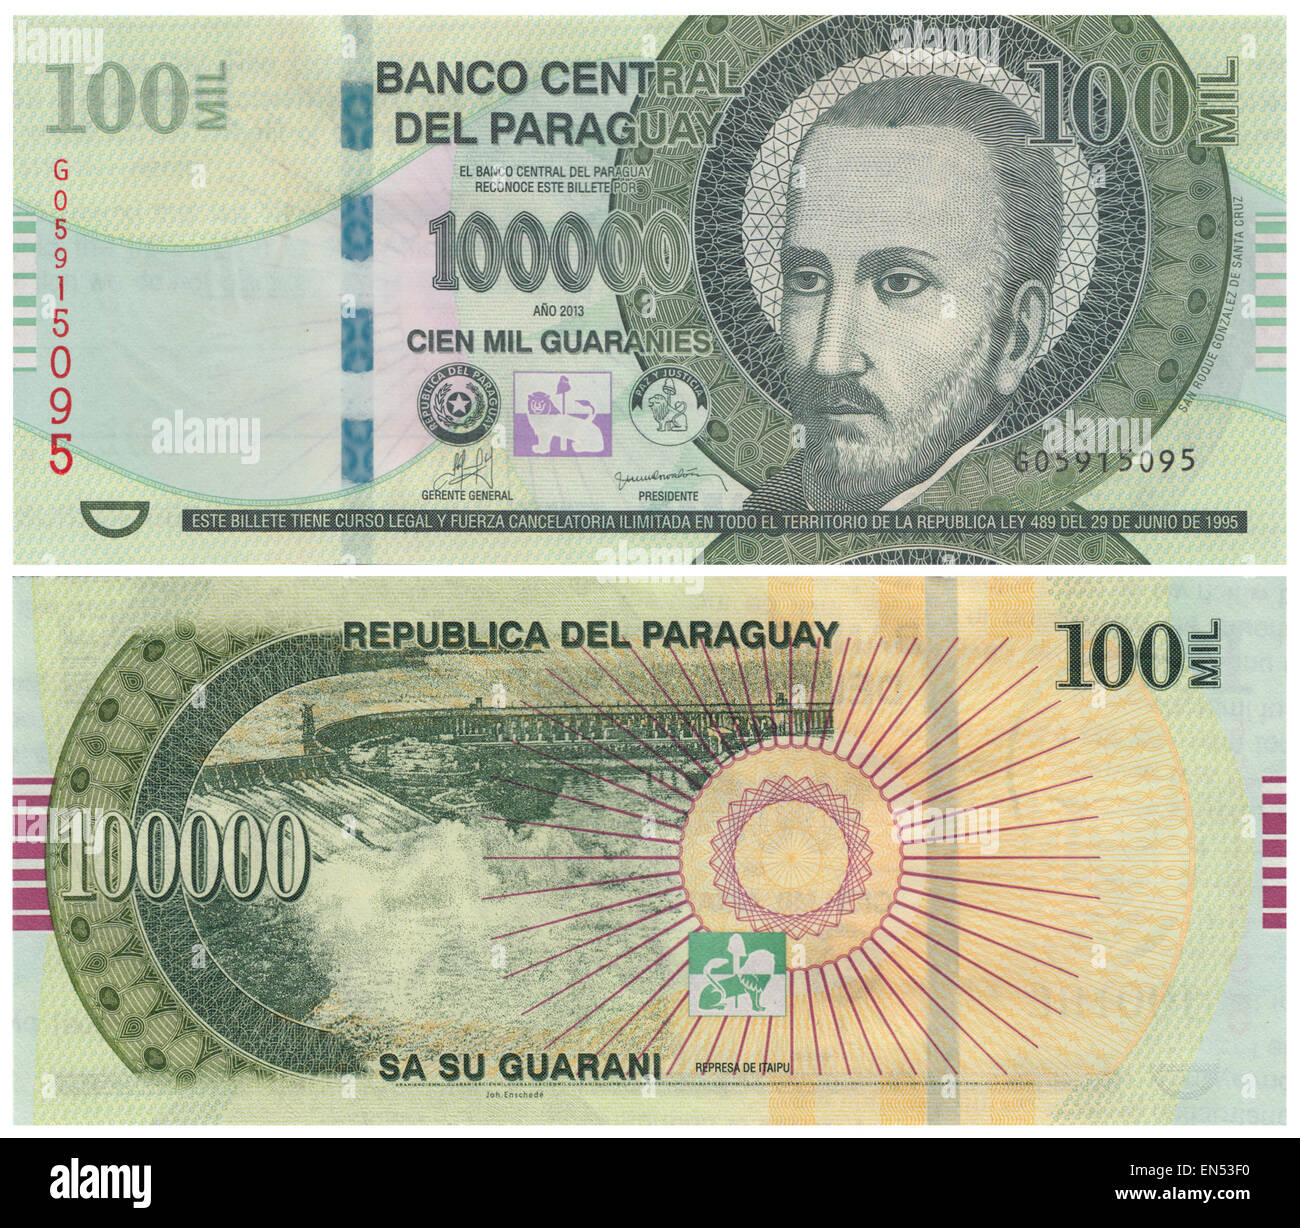 Obverse and reverse of Paraguay ₲100,000 Guaraní bank note (2013). The Guaraní is the national currency unit of Paraguay. The guaraní was divided into 100 céntimos but, because of inflation, céntimos are no longer in use. Stock Photo